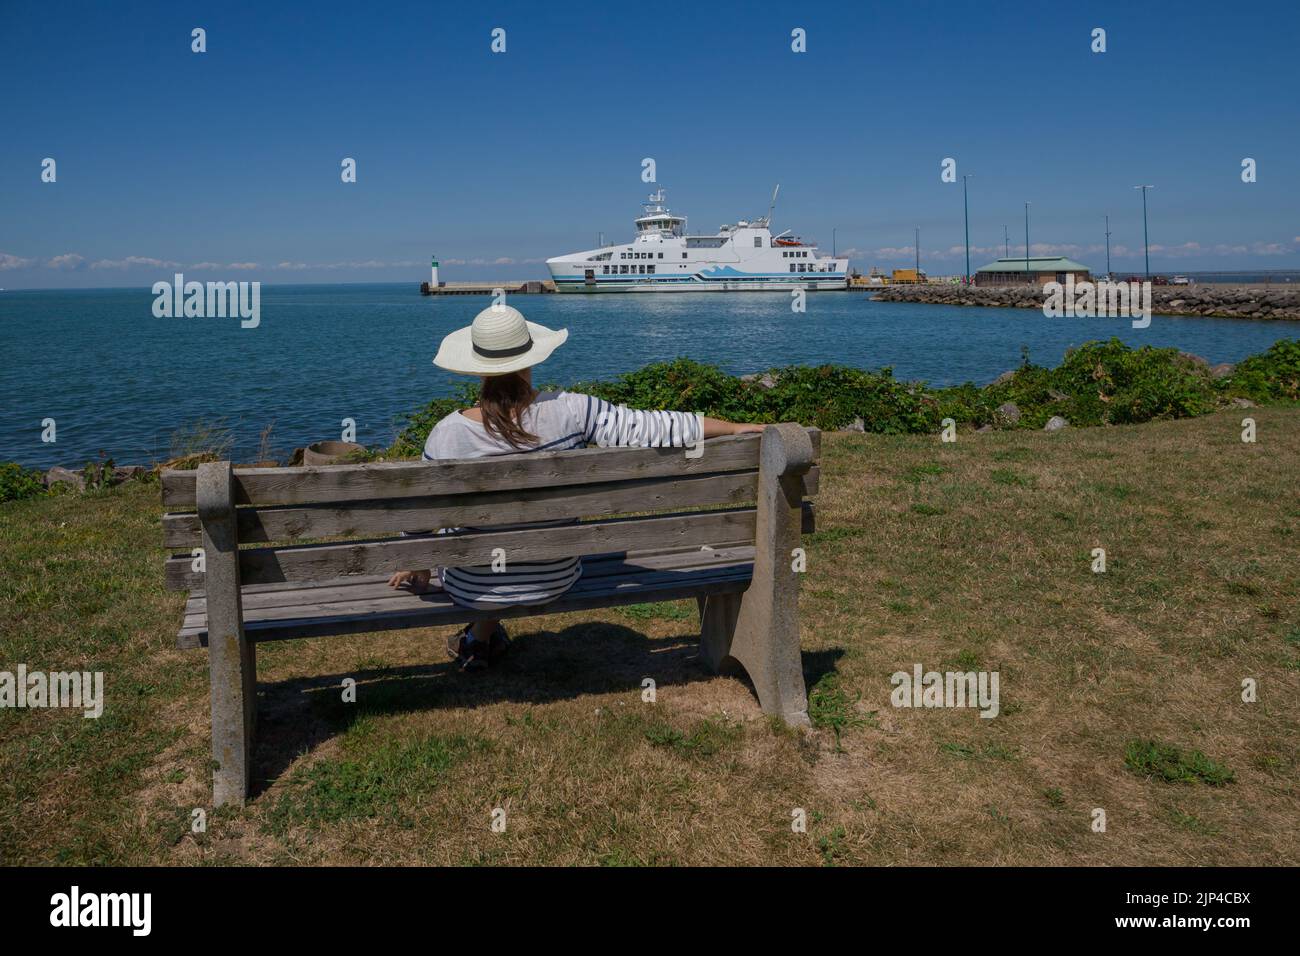 A woman in a hat seat on bench and looking of a ferry ship from the shore. Water transportation cruise liner Stock Photo